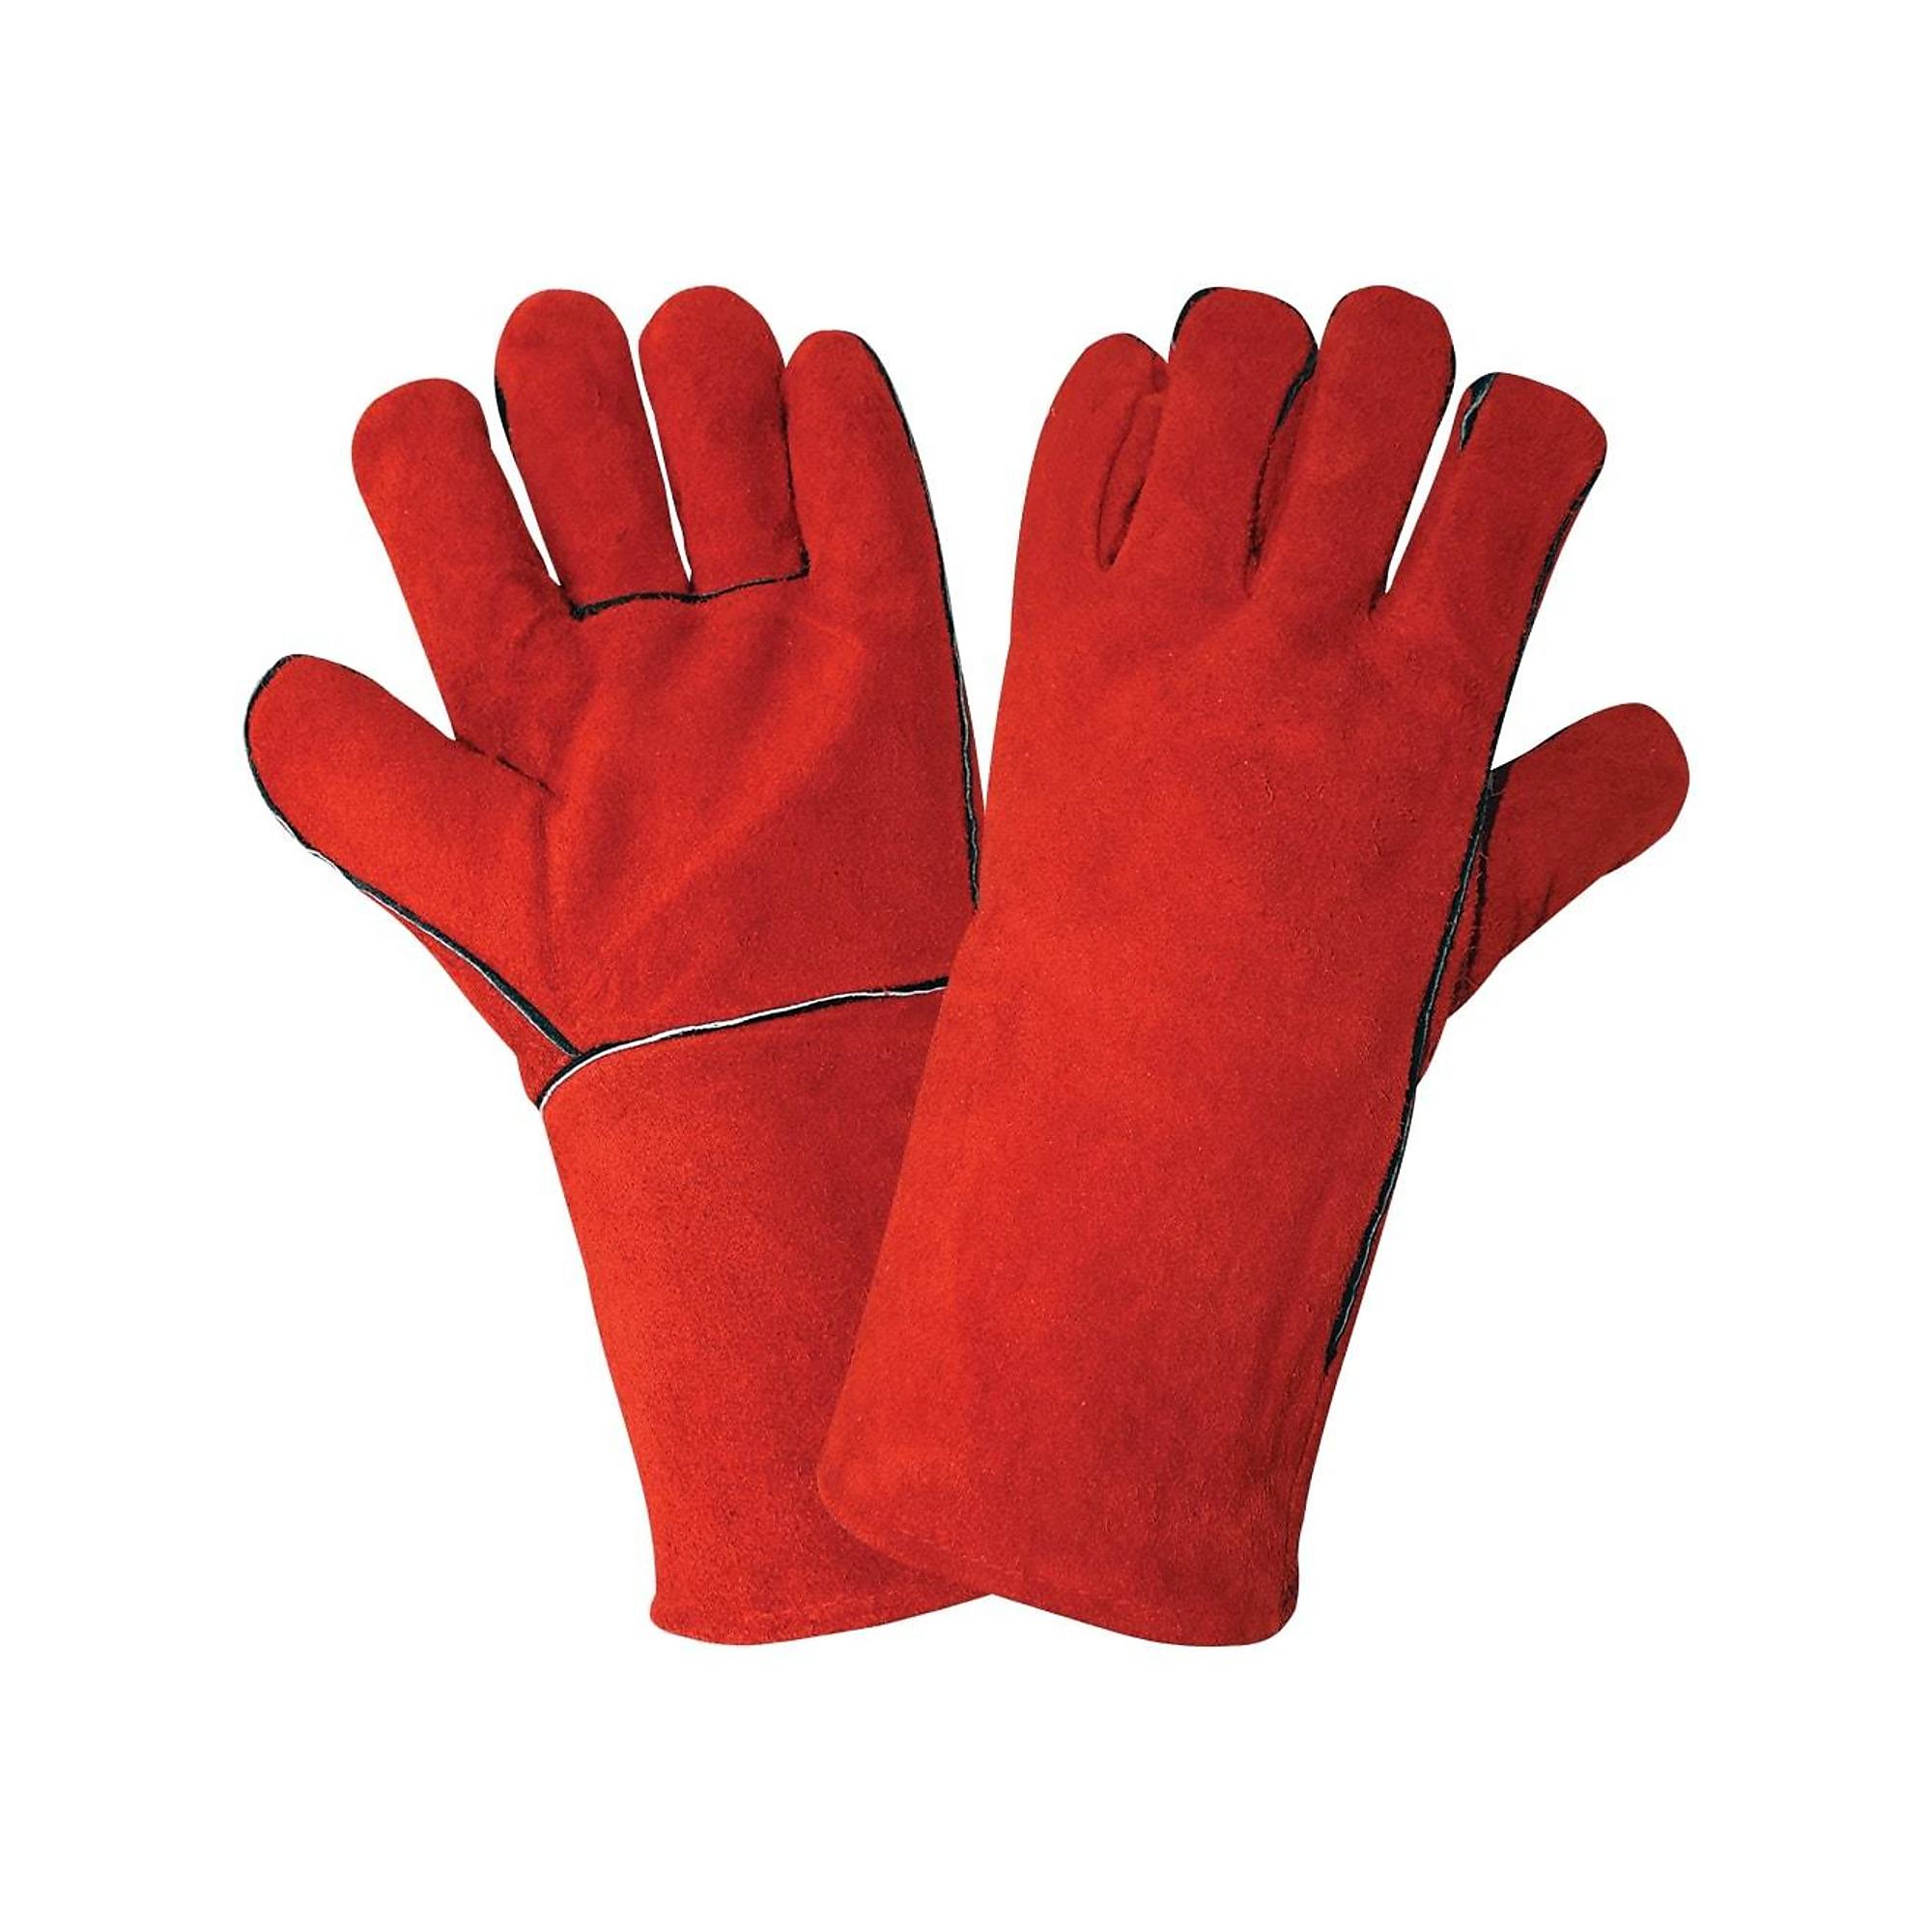 Global Glove, Red, Economy-Grade, Split Leather, Welders Gloves - 12 Pairs, Size One Size, Color Red, Included (qty.) 12 Model 1200E